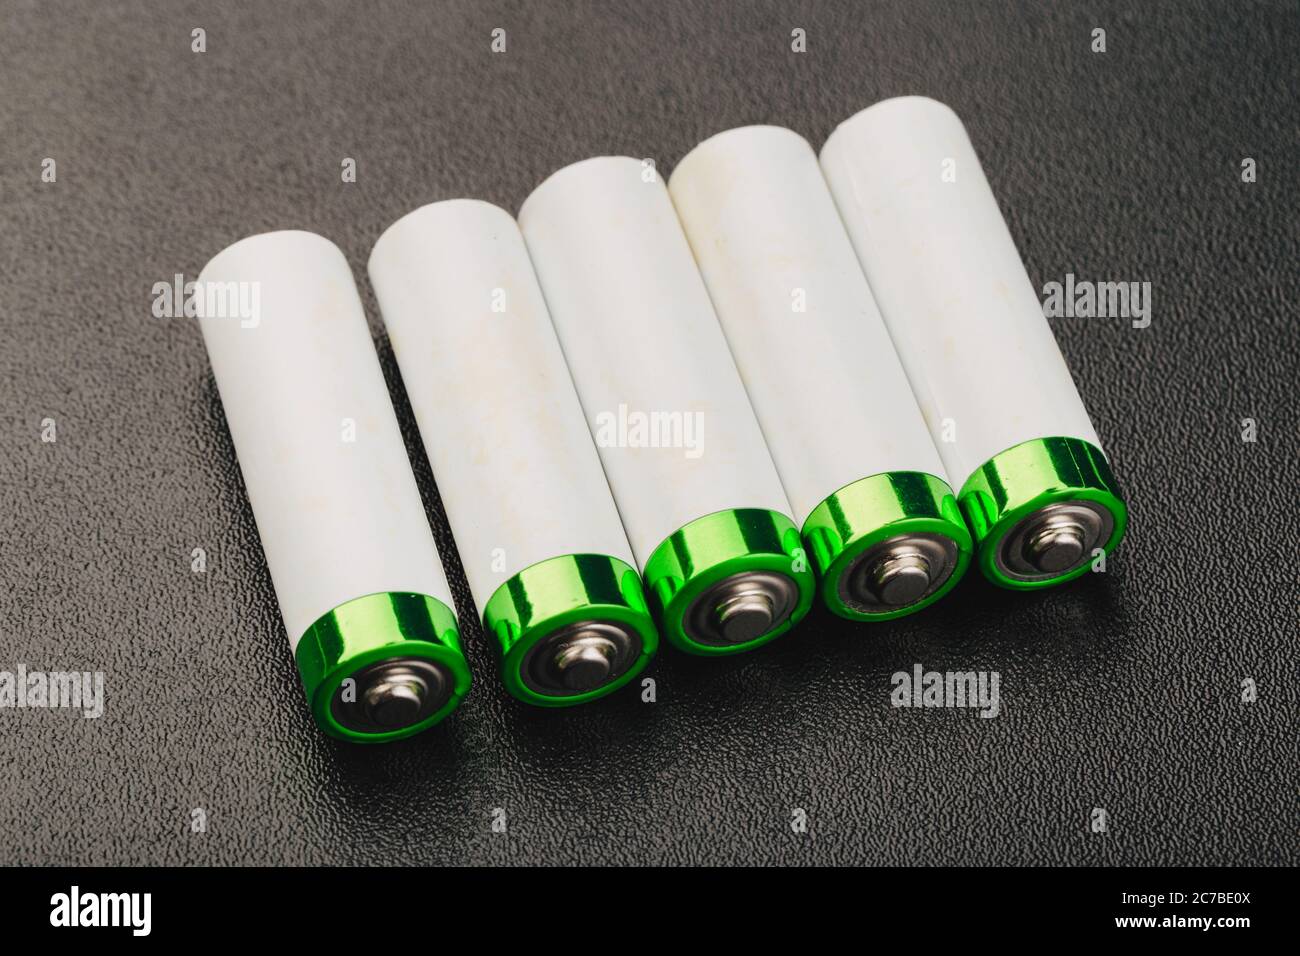 close up of battery positive poles on black backgrounds. intended focused Stock Photo